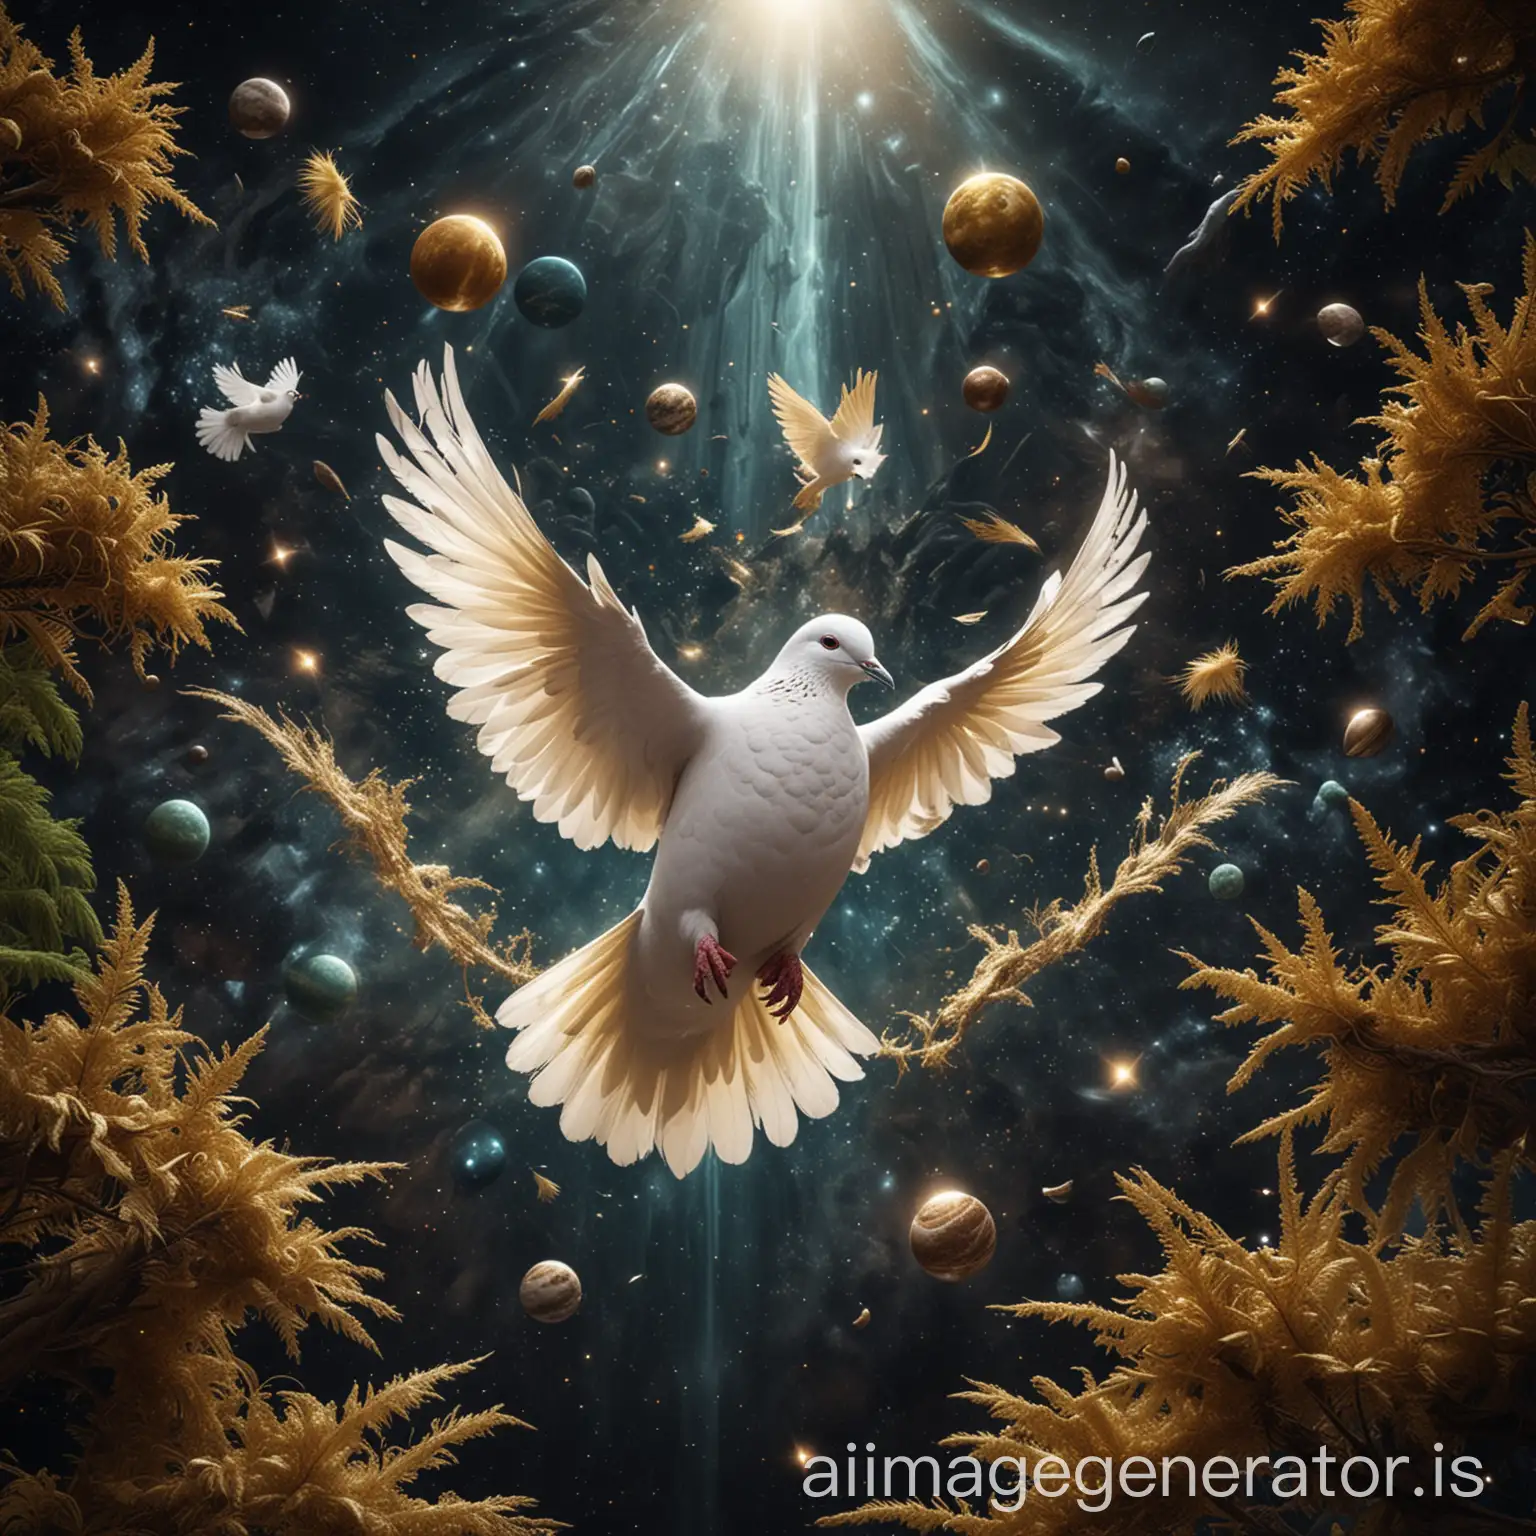 A white dove with golden feathers in space with a real forest flies between planets